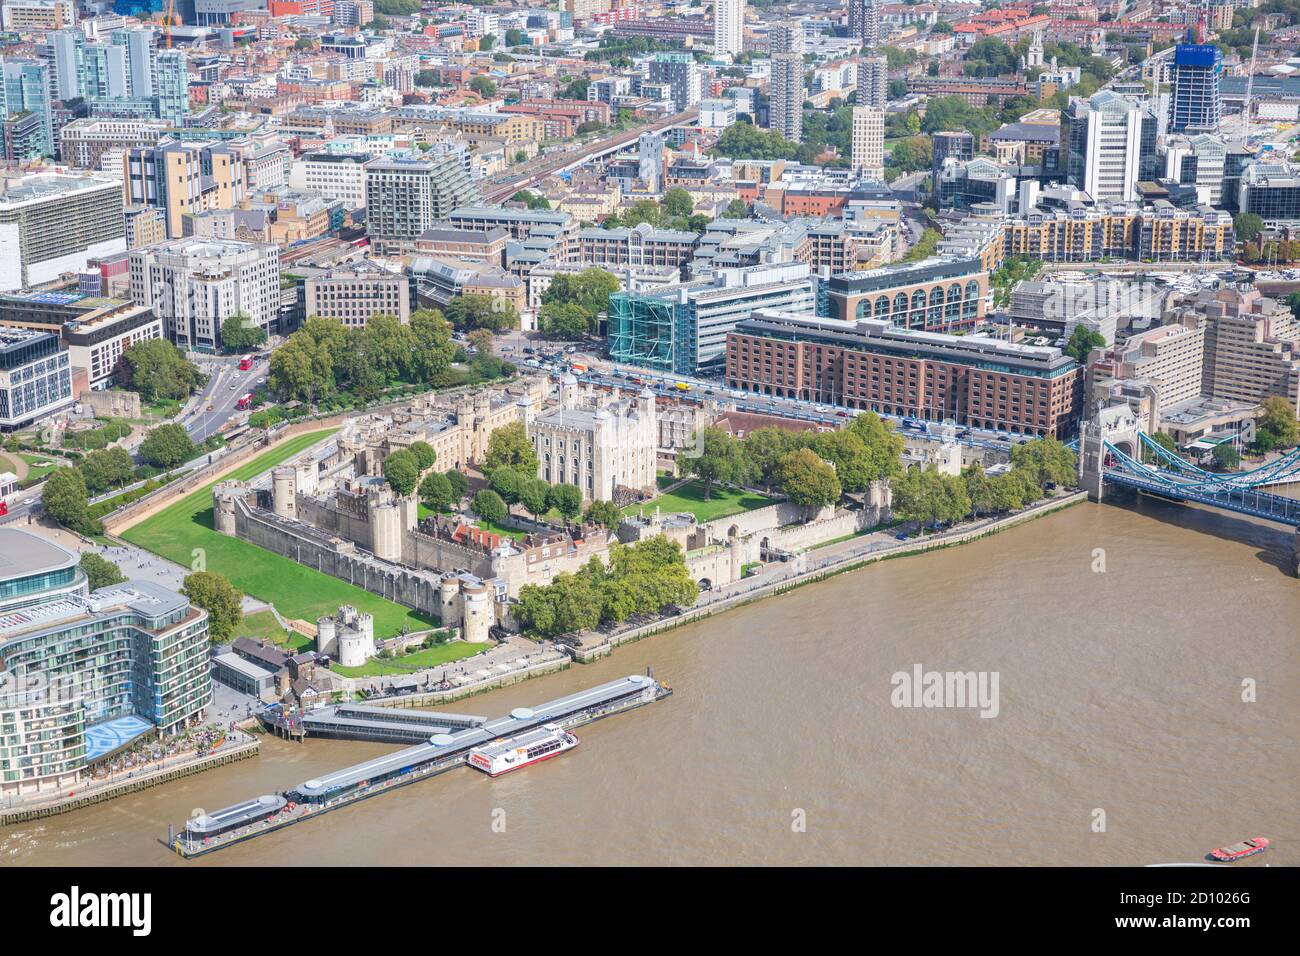 The Tower of London and surrounding buildings in London, England. Stock Photo